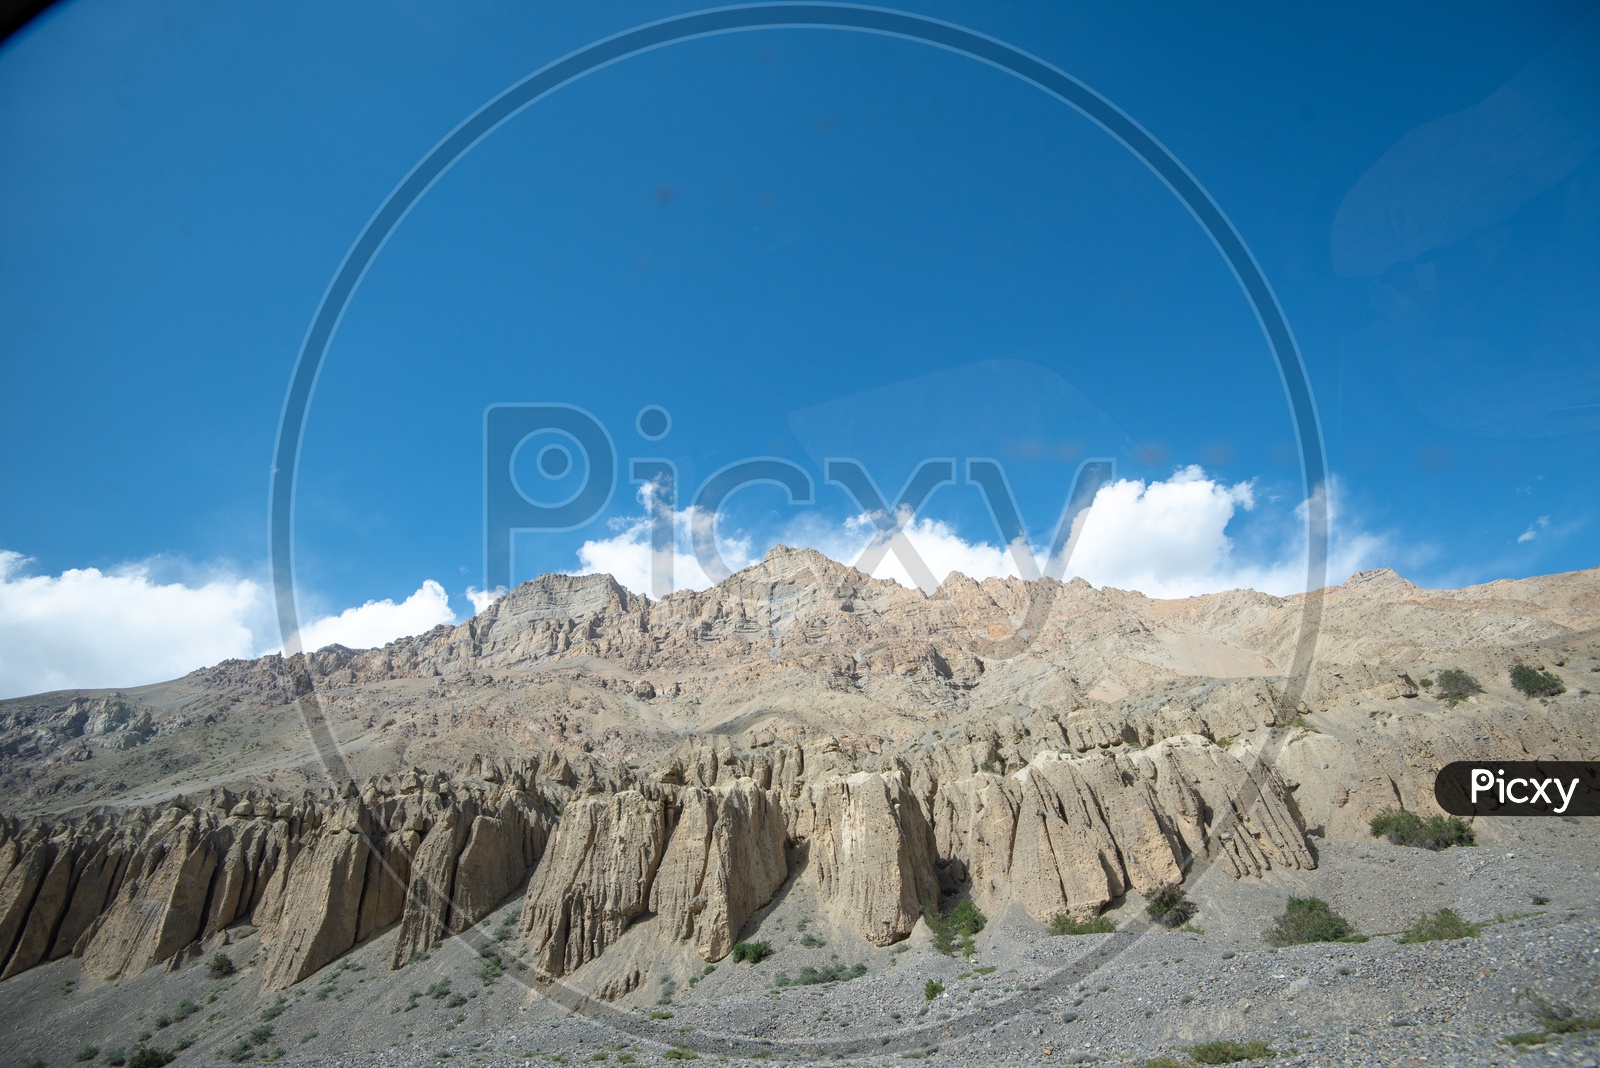 Cold desert mountains in Spiti Valley